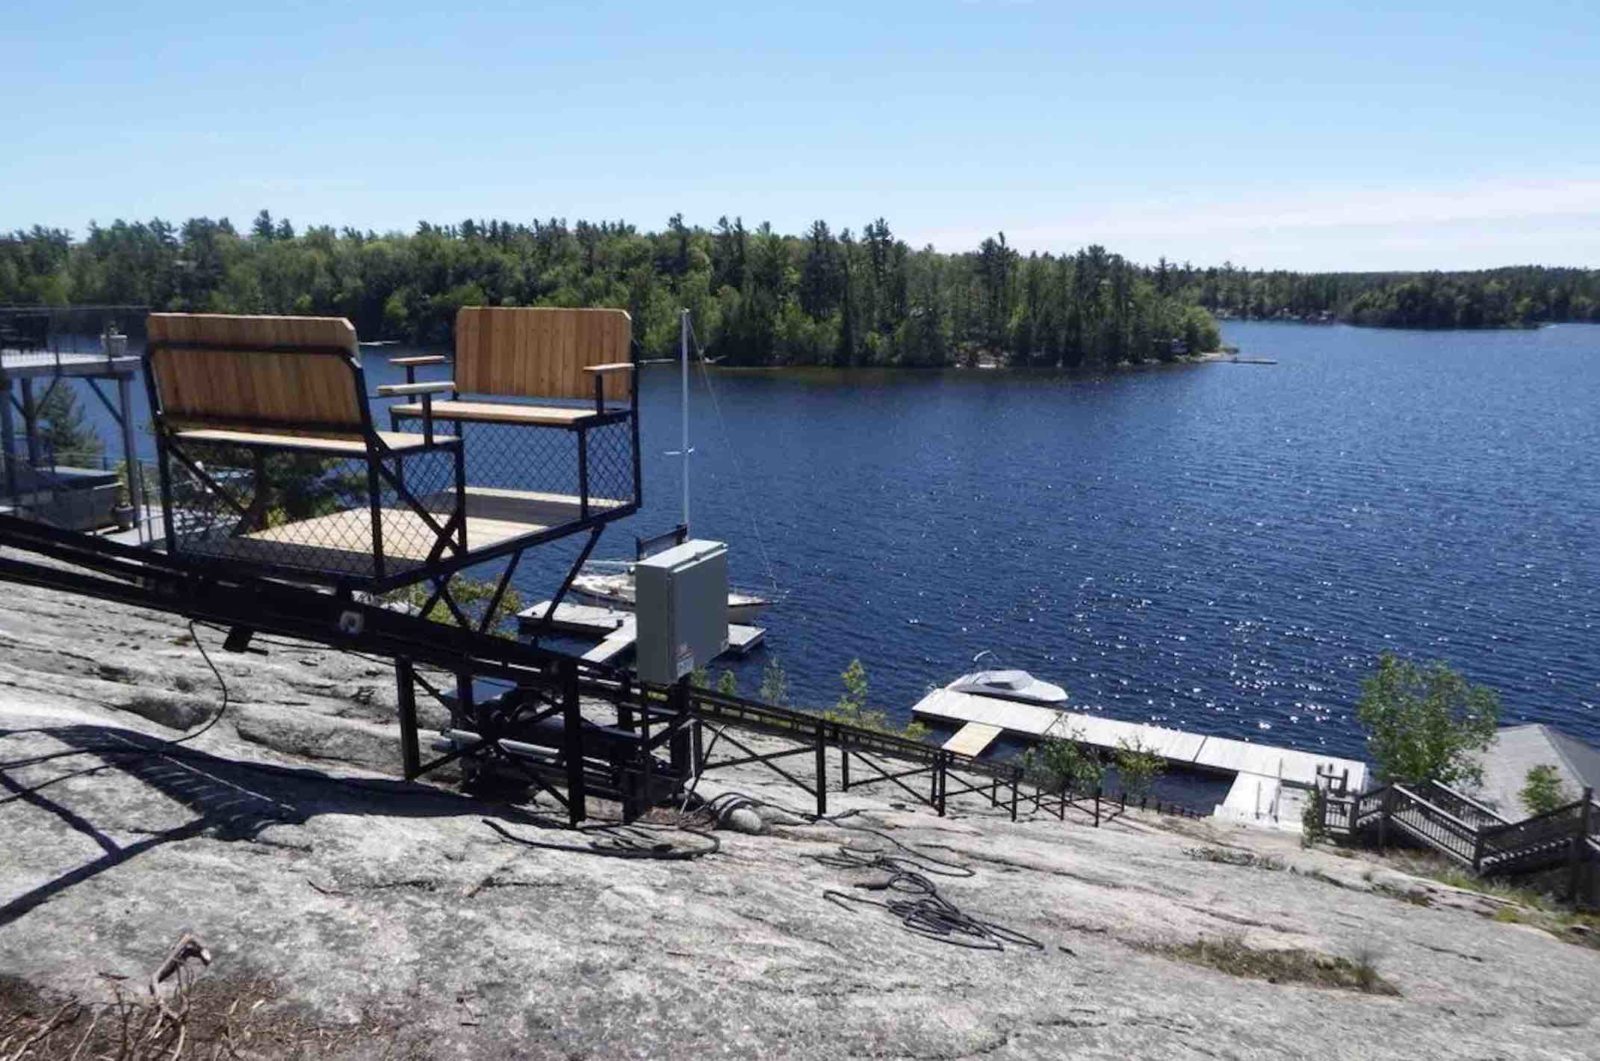 Cottage lifts elevation solutions showing view from lift to lake